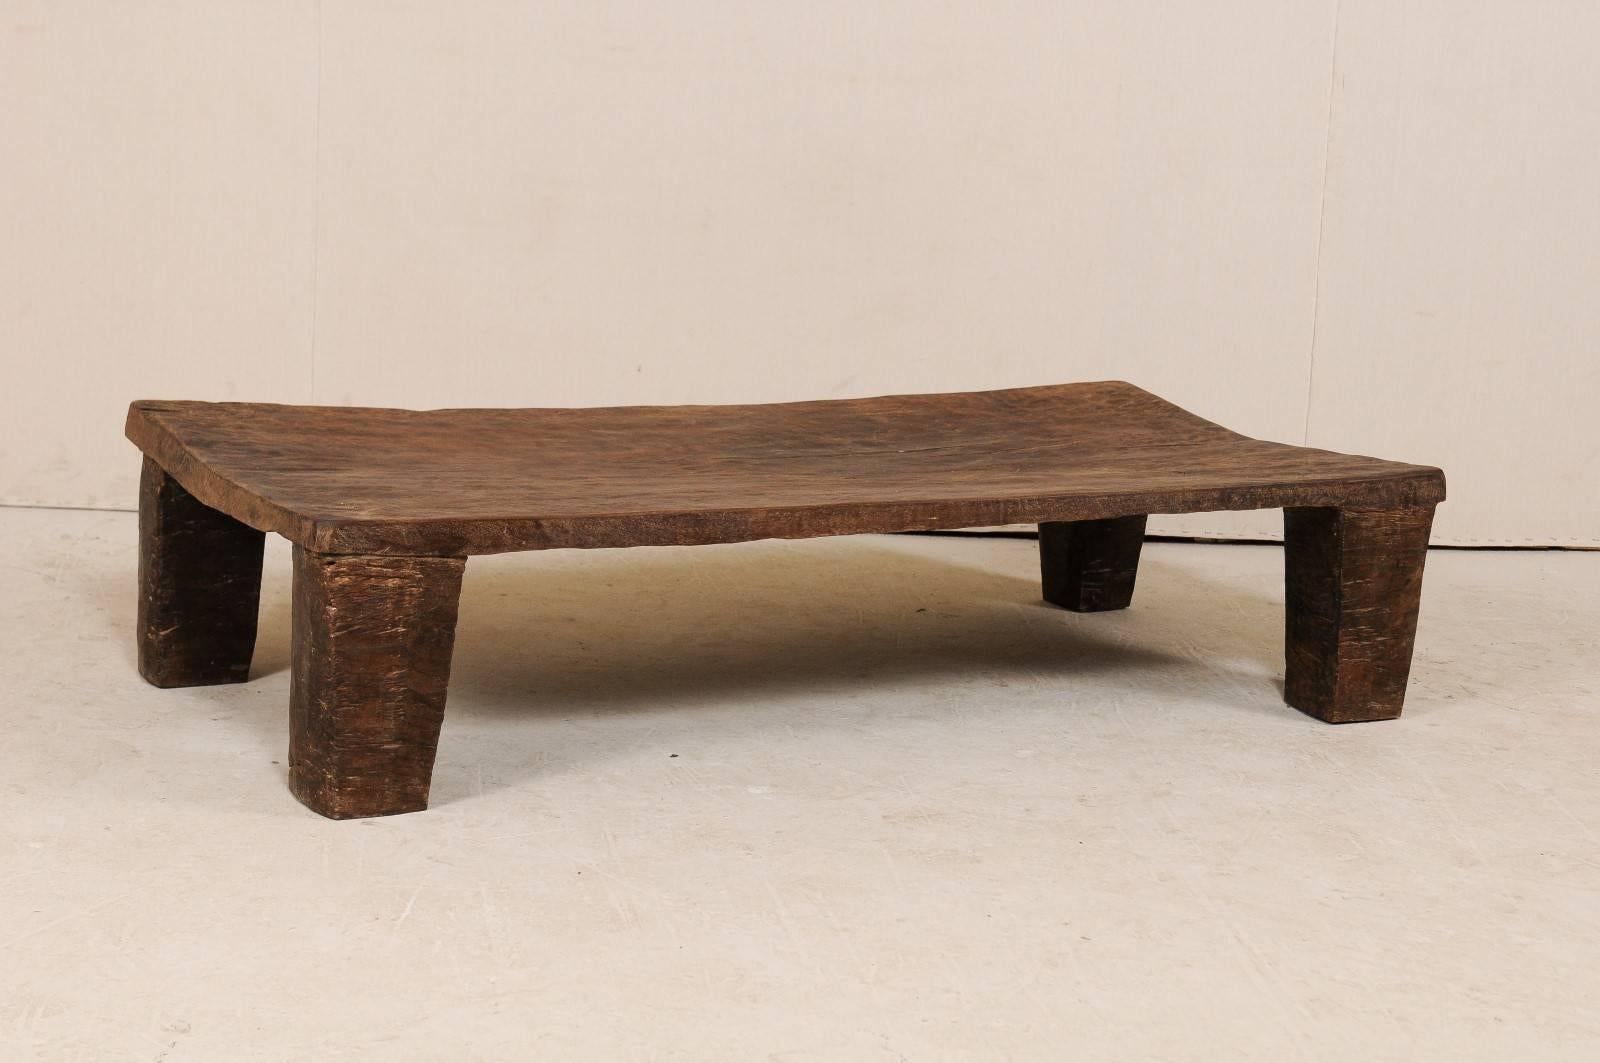 A primitive wood Naga coffee table from the late 19th-early 20th century. This turn of the century coffee table was originally used as a wooden bed from the Naga tribes of Nagaland, North East India. This piece has been carved out of a single log